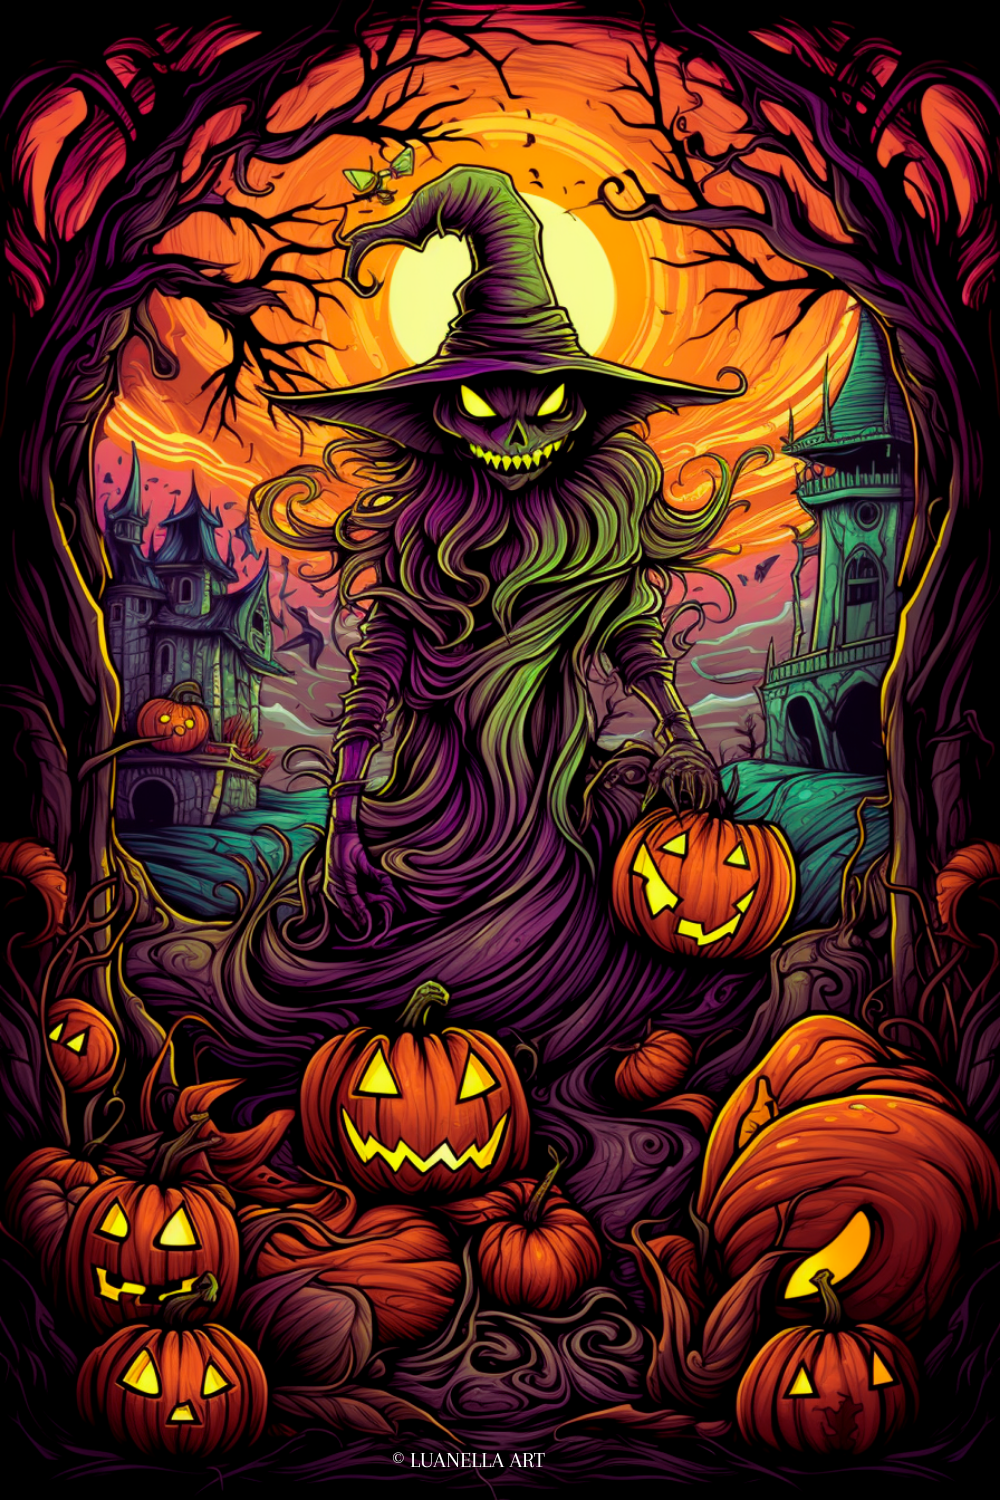 Witch, carved pumpkins and haunted houses | Halloween Art Print | Instant Digital Download